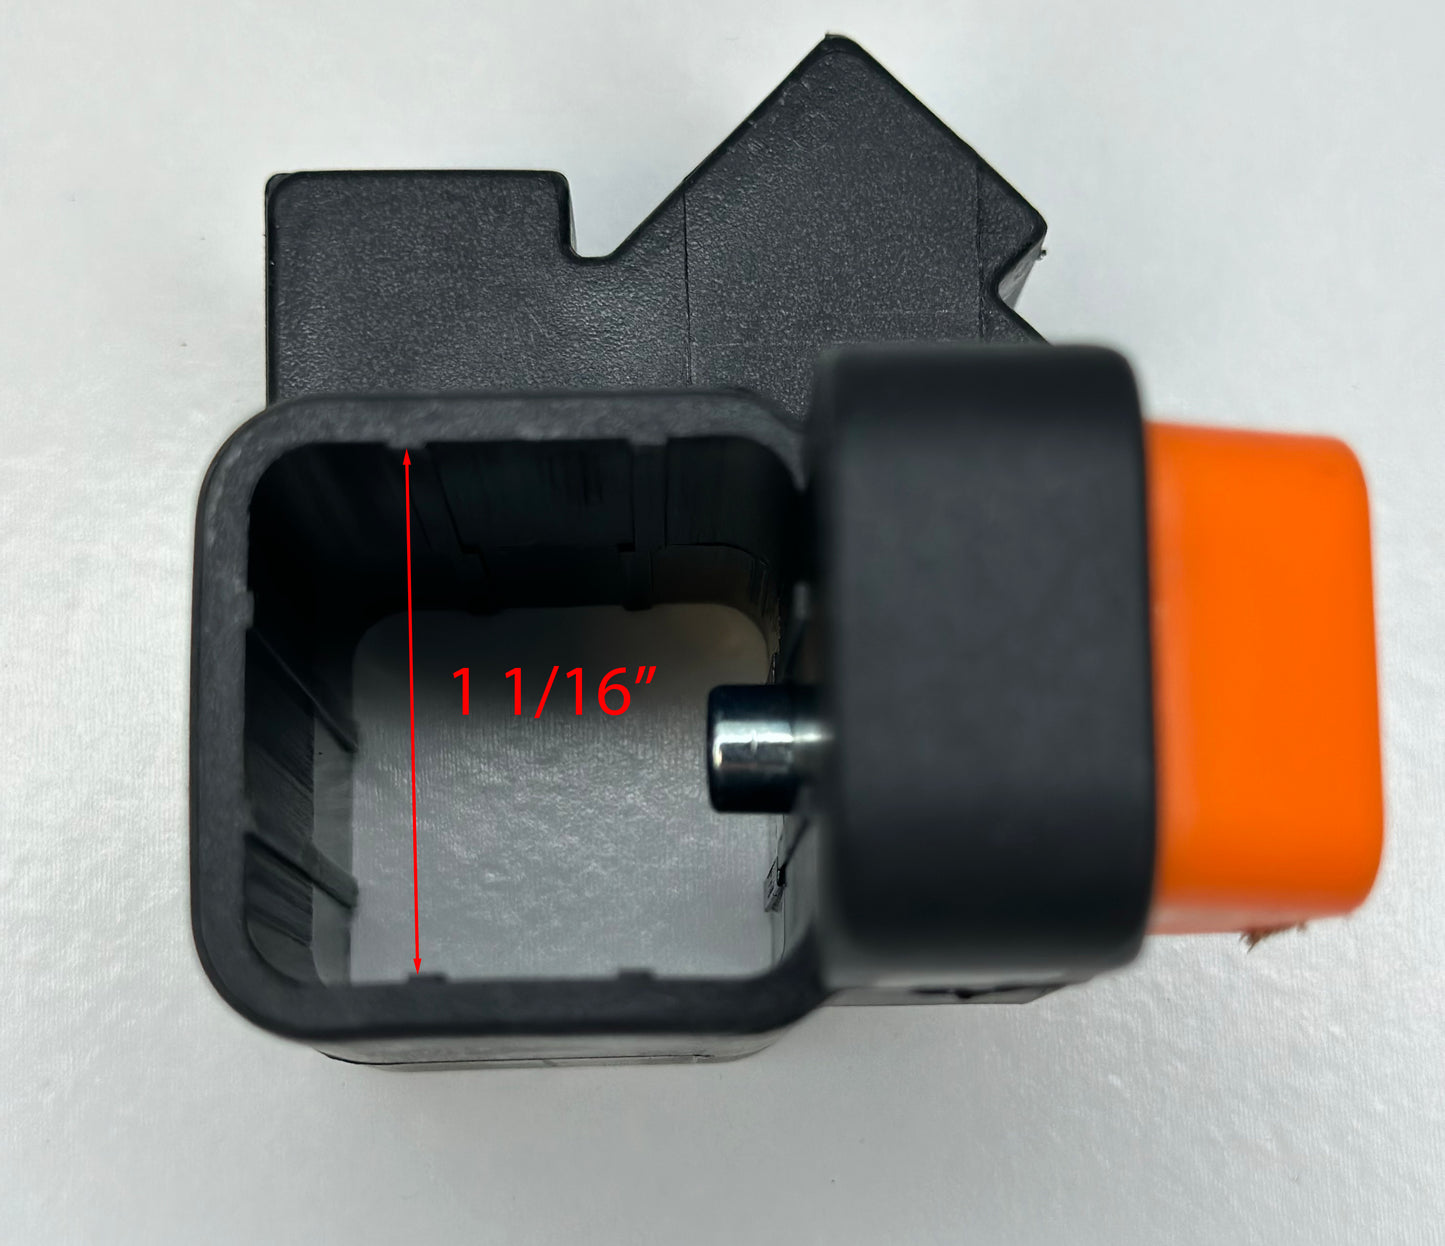 Top-down view of the interior of a black and orange leg slider, labeled with a measurement of 1 1/16 inches, for an Ozark Trail canopy's leg adjustment mechanism